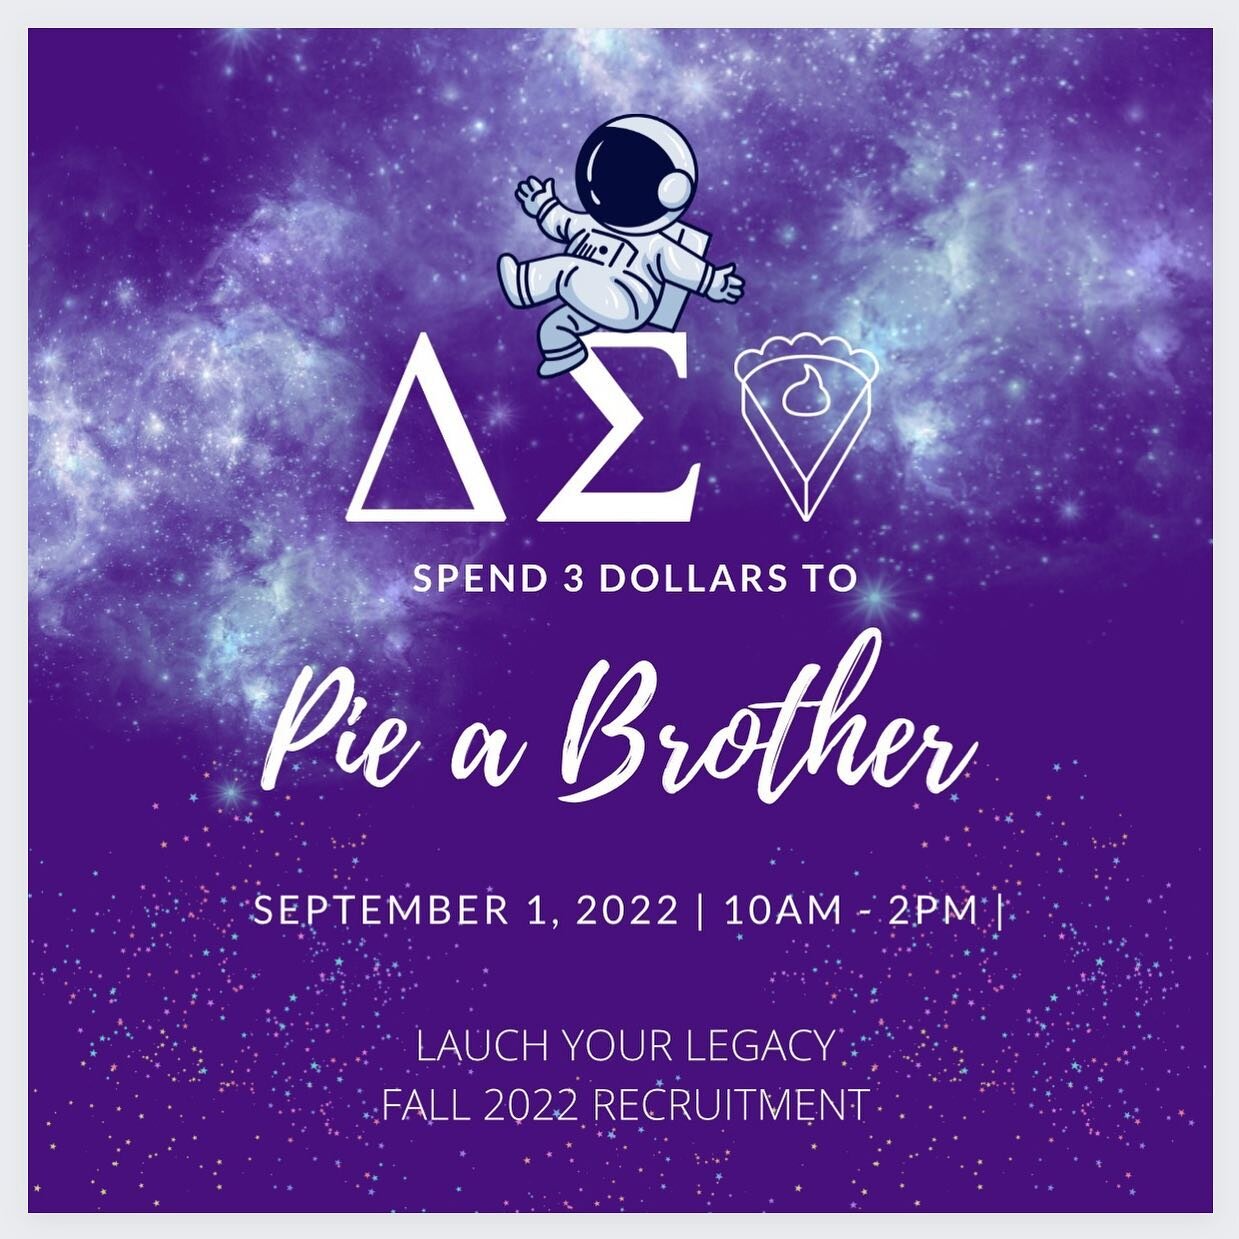 TODAY IS SHIDLER DAY!!!! Come visit us on campus at Shidler and join in the fun as we get Delta Sigma Pi(ed)! 

We will be tabling from 10-2, so come meet some brothers, get your questions answered, make some new friends, and for $3 you can pie a bro